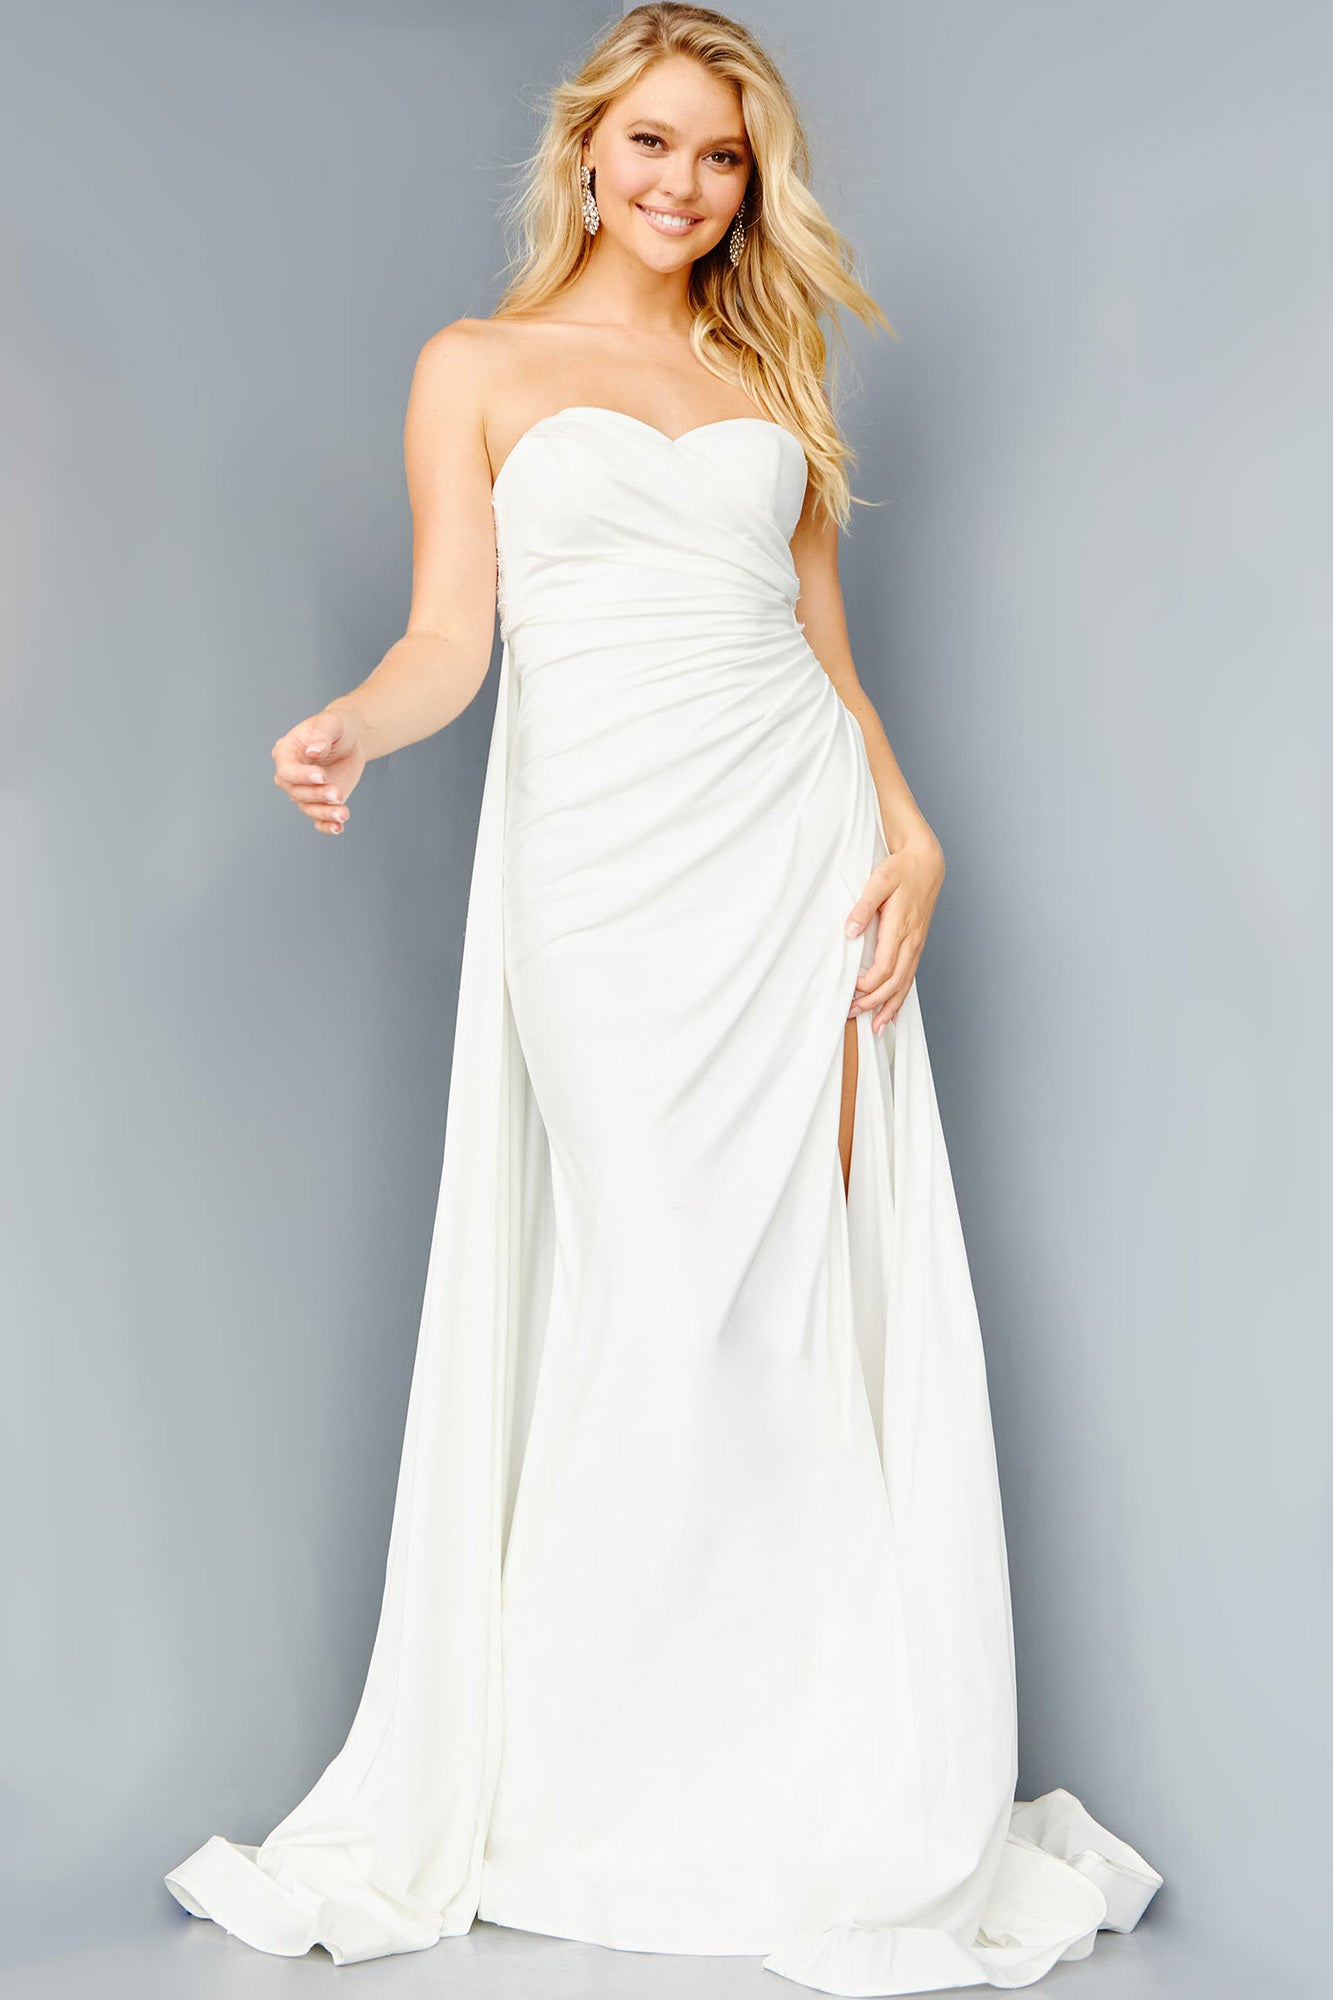 JVN07648 Long Flowy Prom Dress Pageant Gown. Strapless with Ruching and a high slit.  Would make a nice informal wedding dress. 